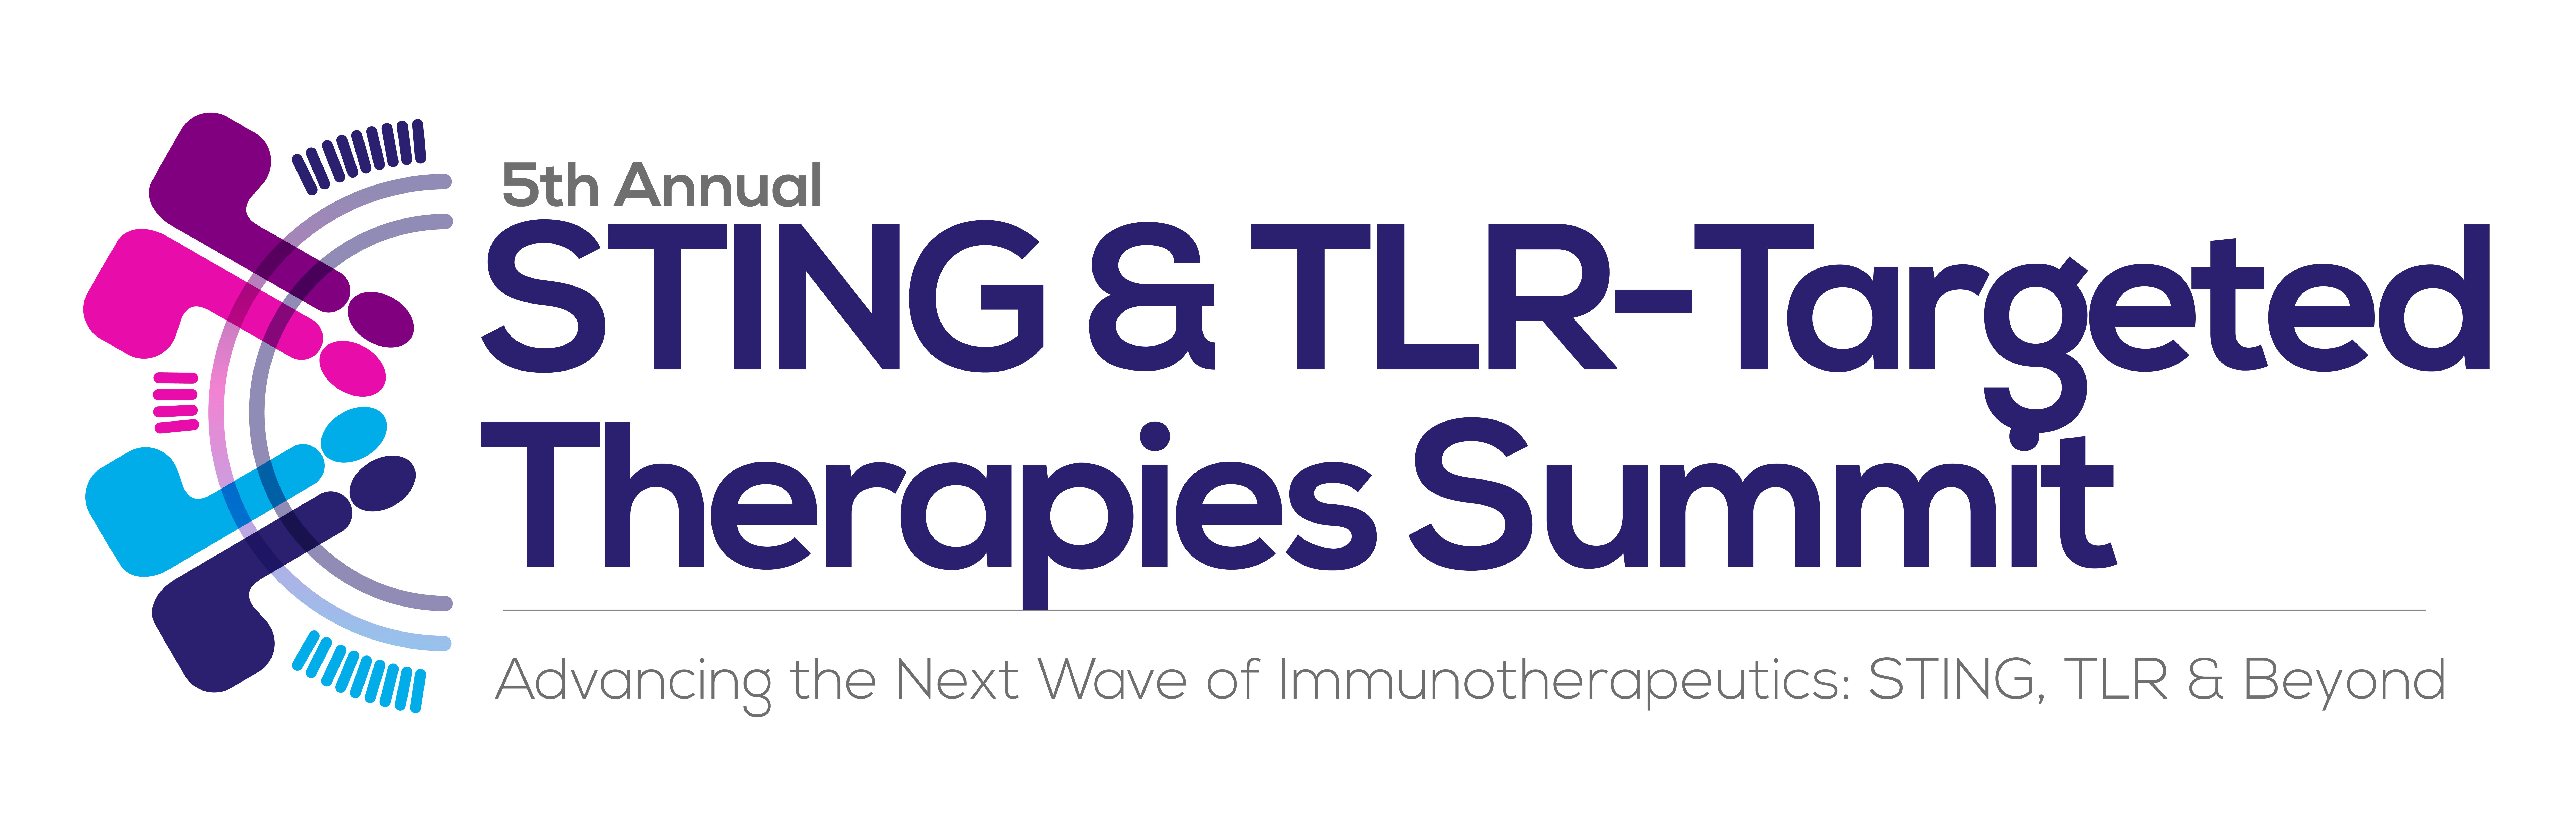 HW240126 48550 5th sting & TLR targeted therapies summit logo COL